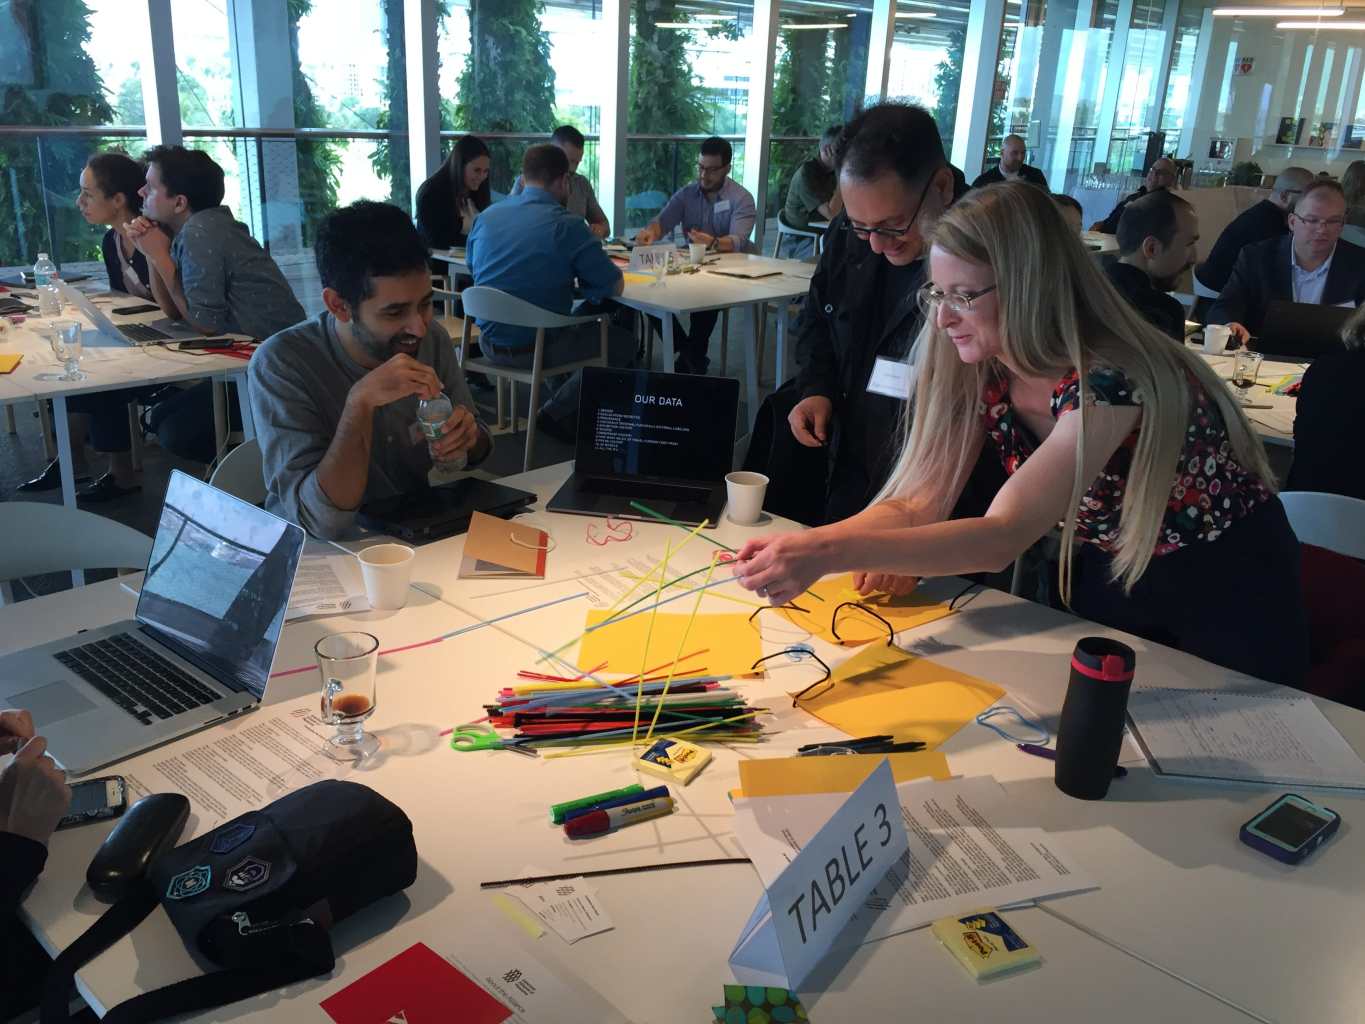 A group of people gathers around a table looking at the pipe cleaners and pieces of paper they had to make their prototype with. Two of the people are in the process of building the prototype by connecting the pieces of paper with the pipe cleaners. A laptop screen is visible showing a PowerPoint presentation with a slide titled "Our Data."